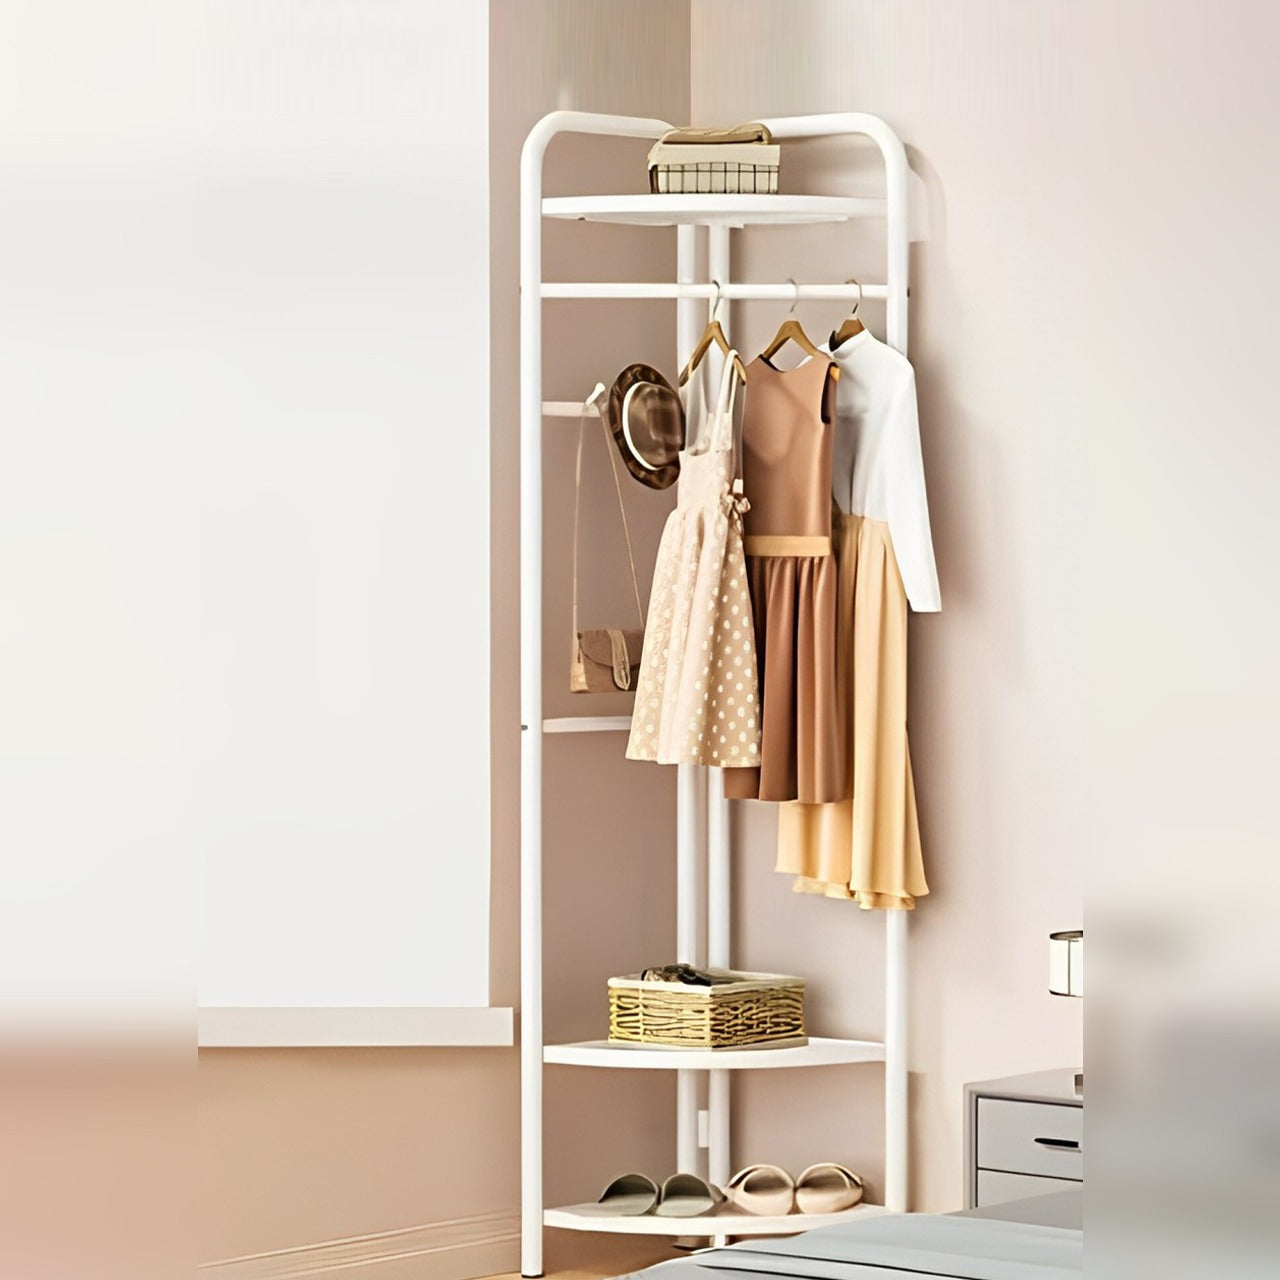 Garment Clothing Rack with Bottom Storage- Multi-purpose Cloth Hanger for Hand-bags, Hats, Scarf and Storage for Shoes